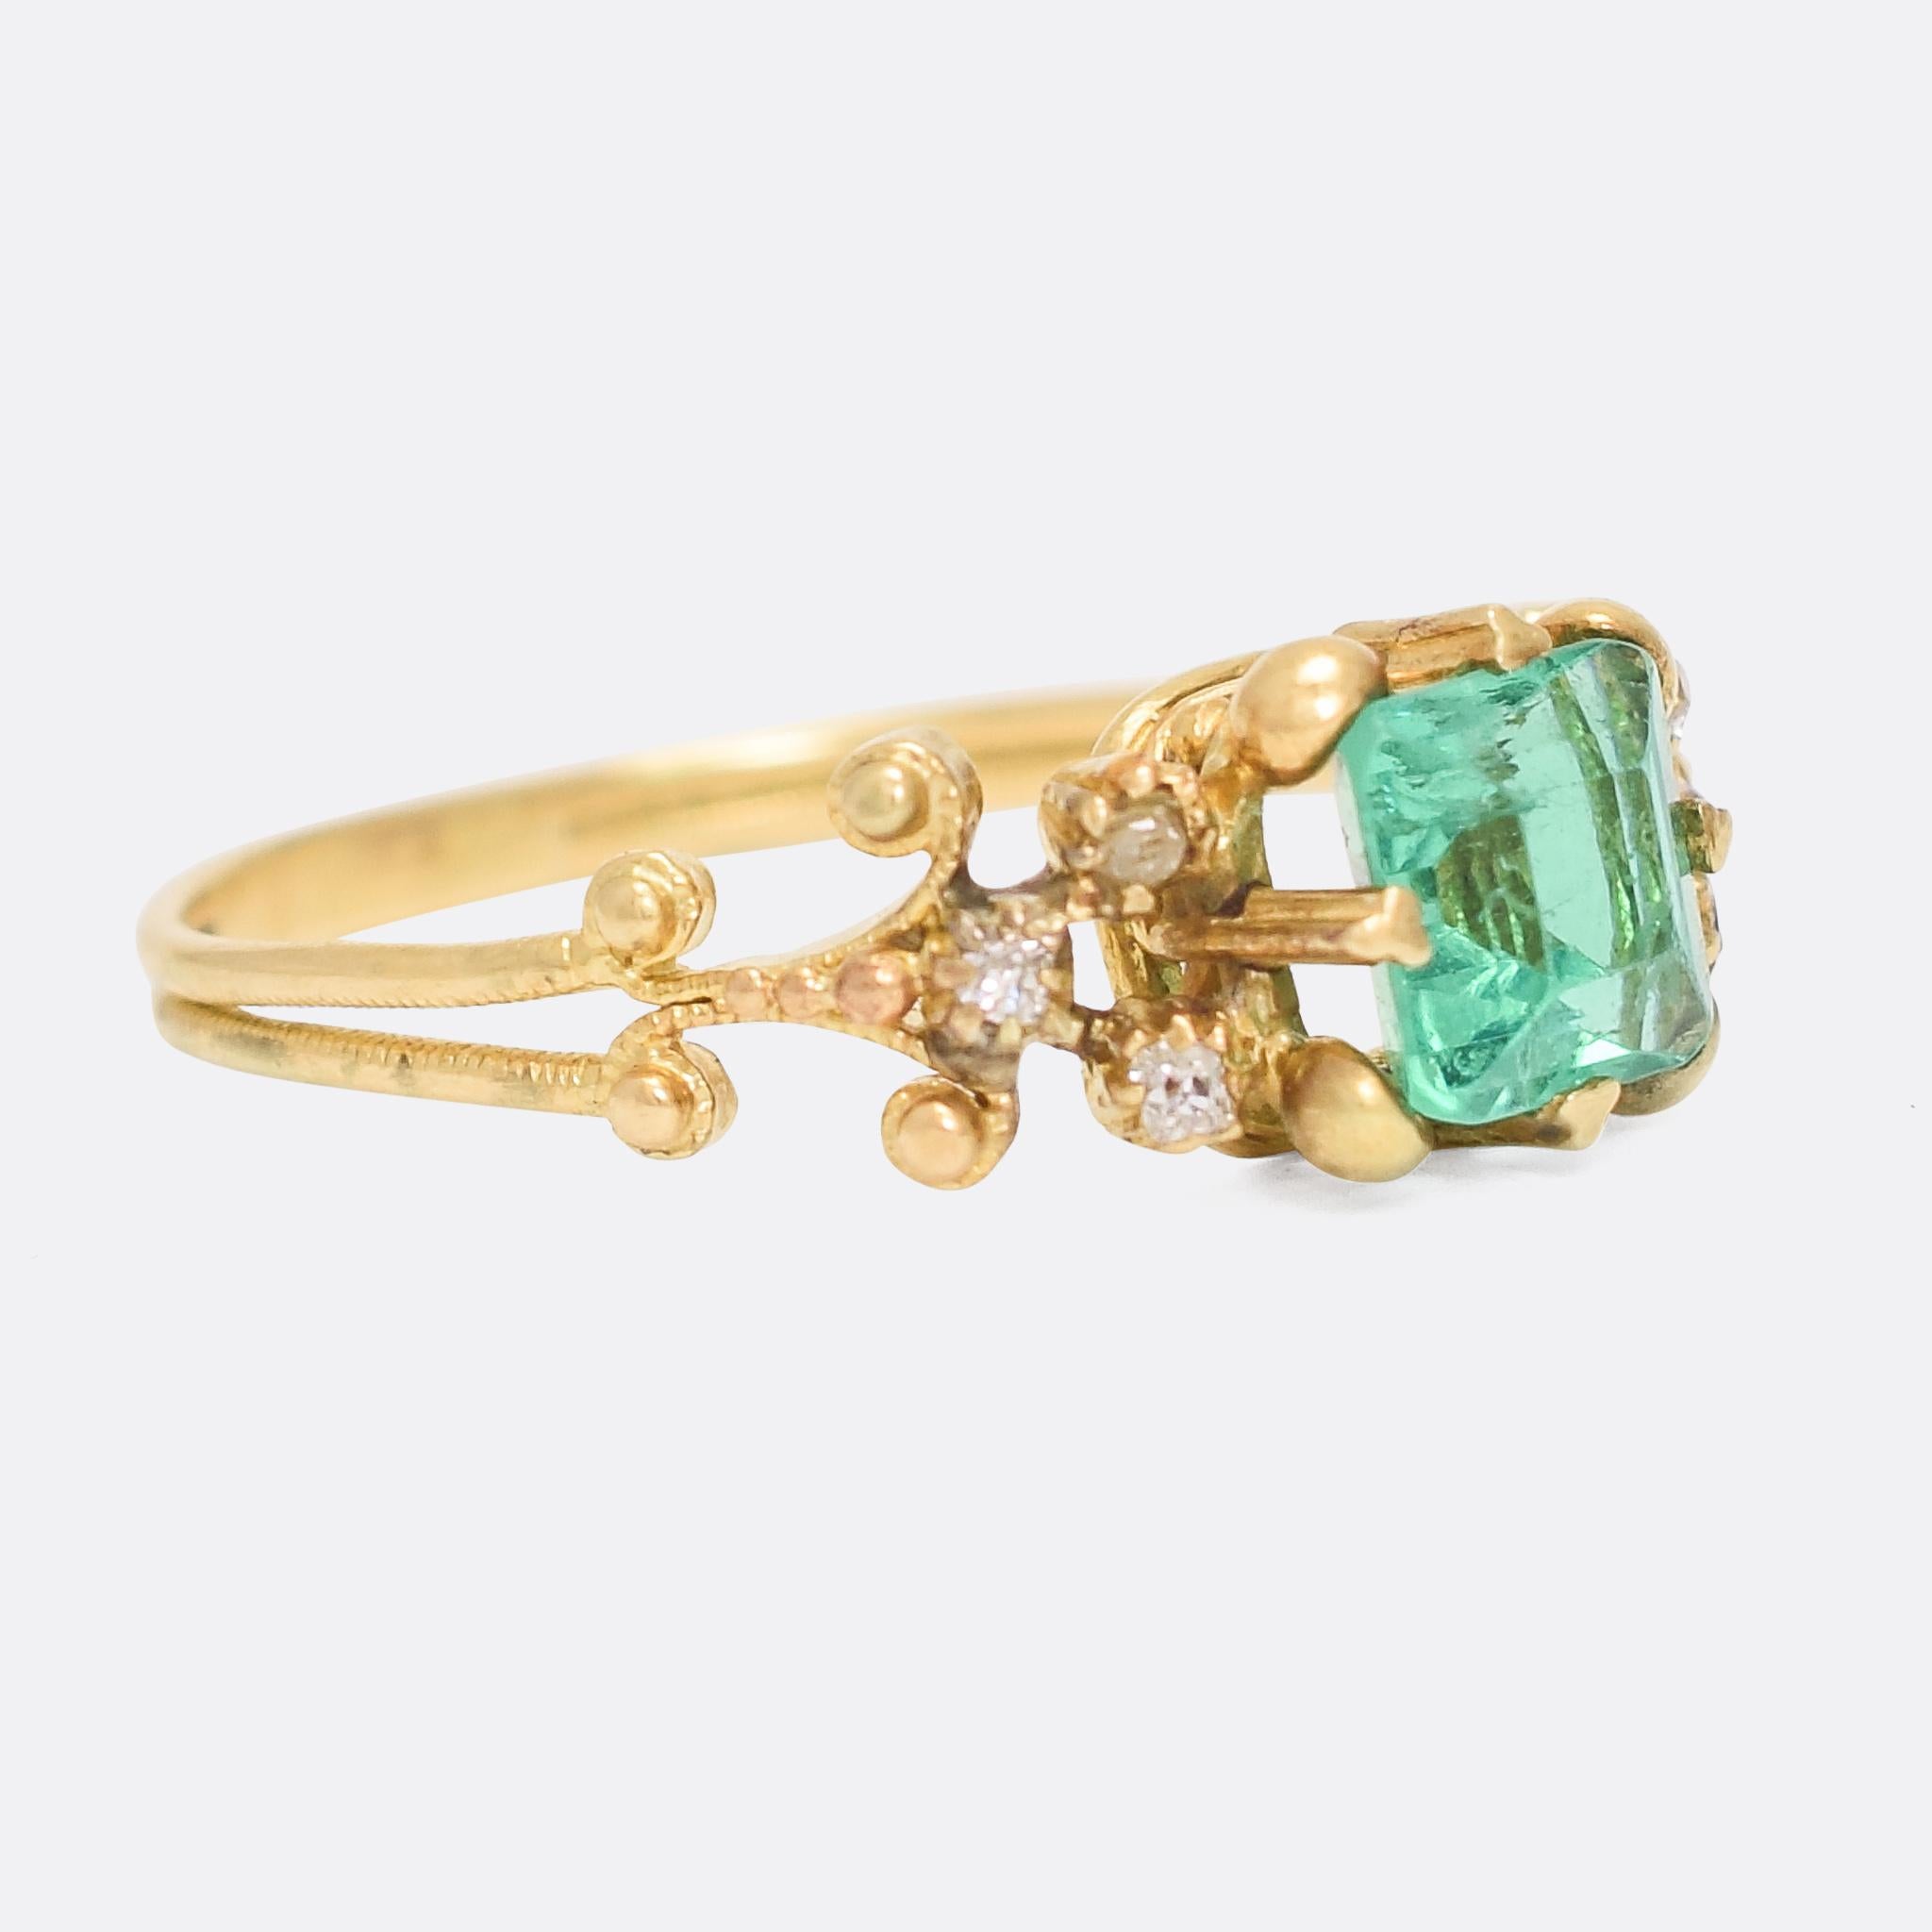 A beautiful Georgian Emerald solitaire ring with exquisite cannetille gold work and diamond accents to the shoulders. The emerald is bright and vibrant, and rests in a crown-like claw mount, and the ring is completed with a simple reeded band. It's